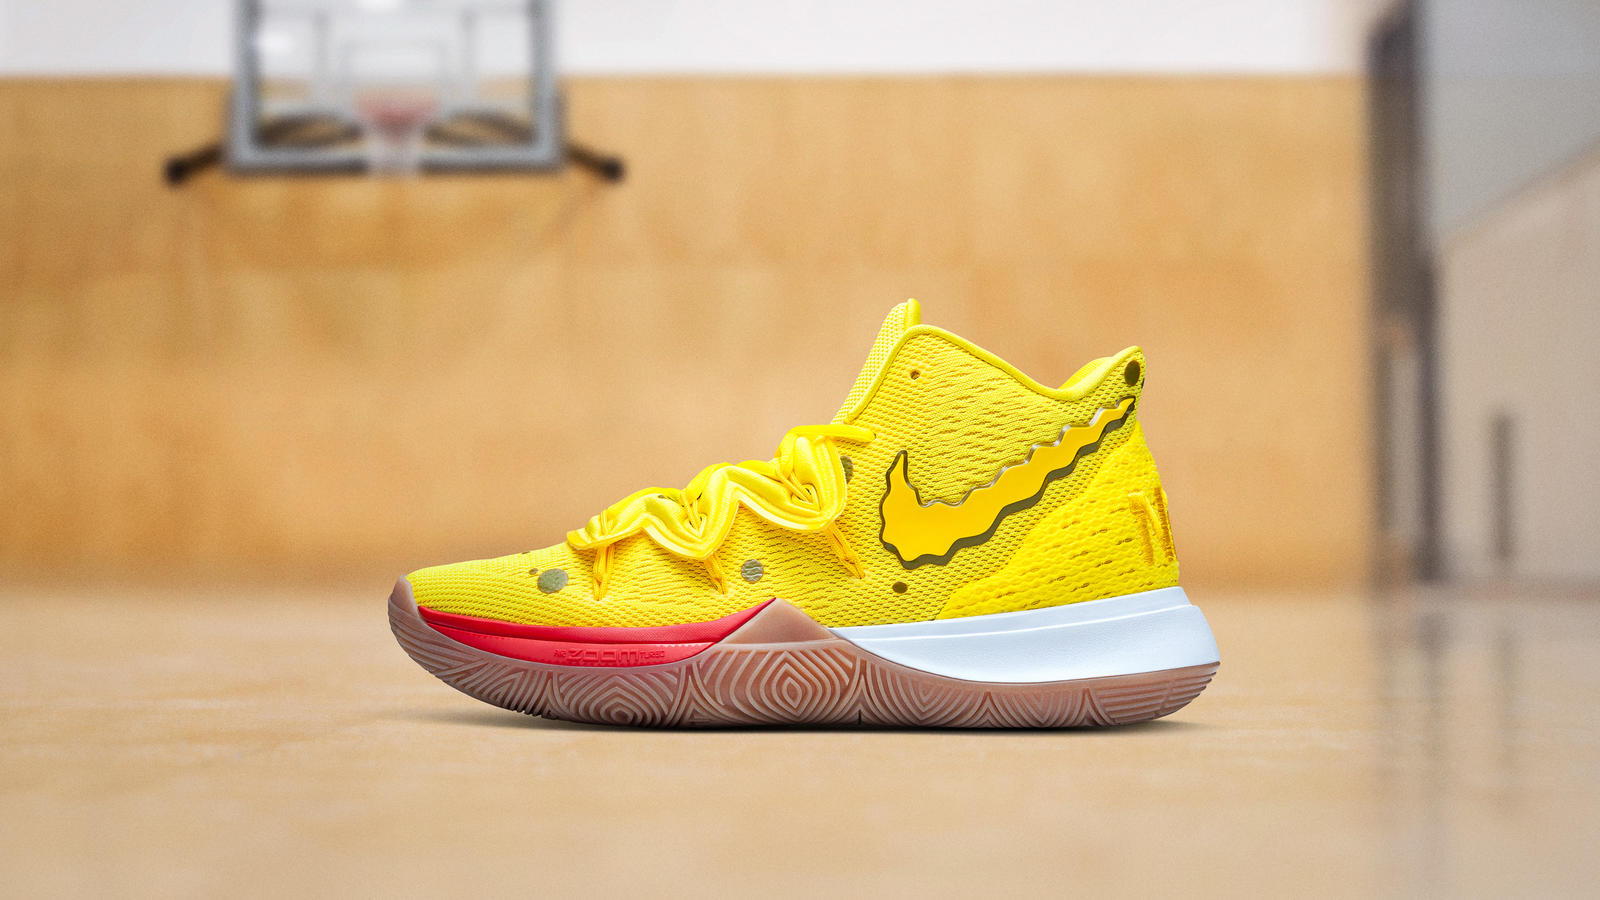 Frágil Leche maestría Nike and Kyrie Irving Release the SpongeBob SquarePants Collection 